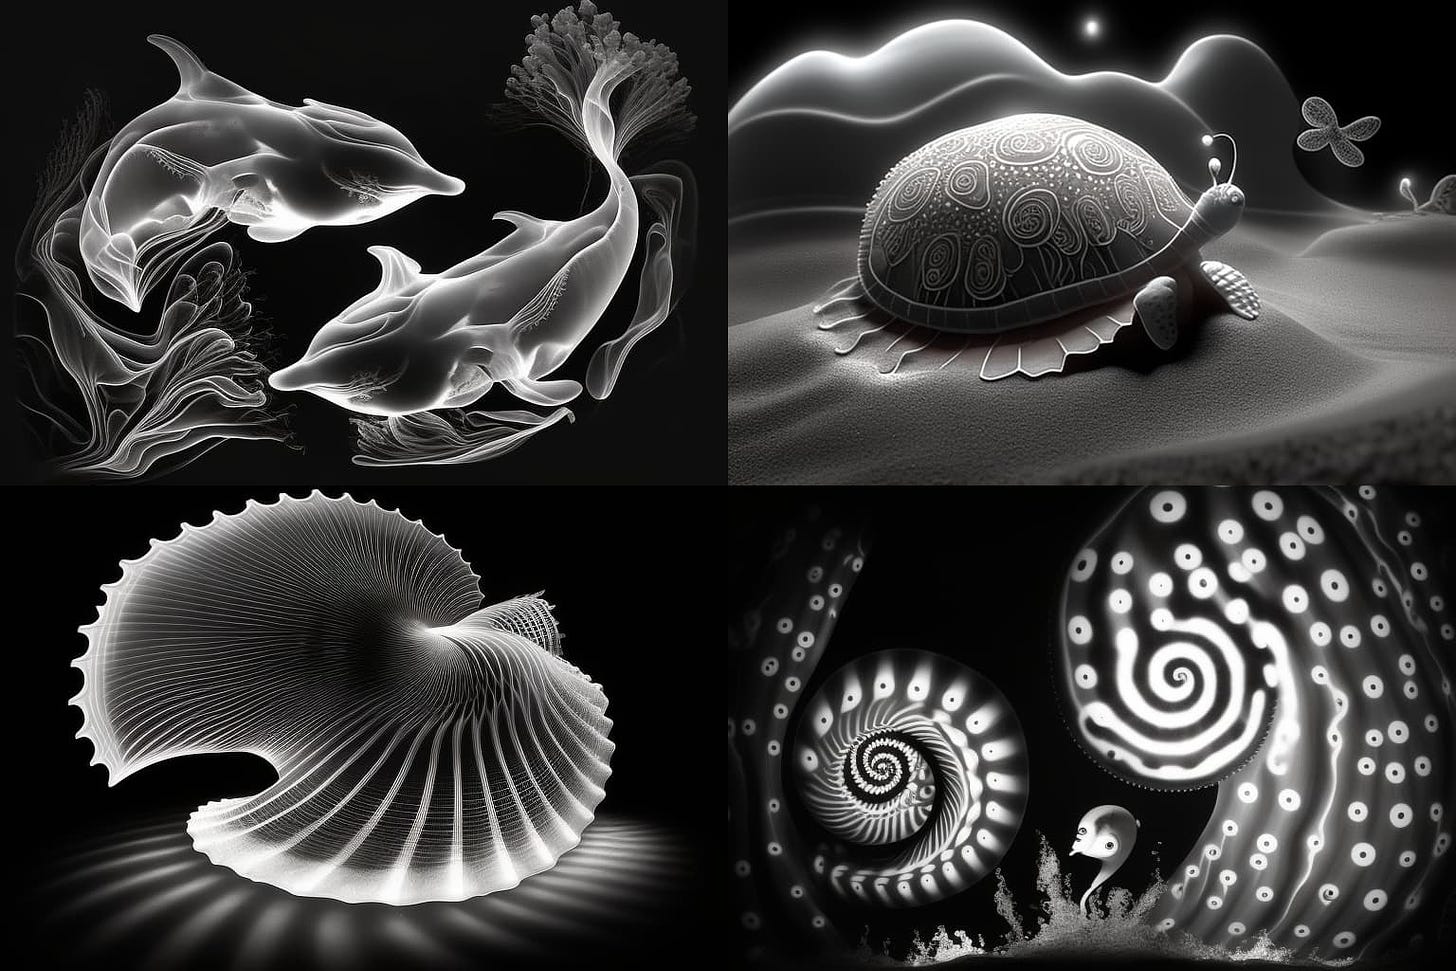 AI-generated images in black and white tones using a luminogram technique and emojis of a shell and wave. The "chaos" parameter has been added to return more variability to the image results.